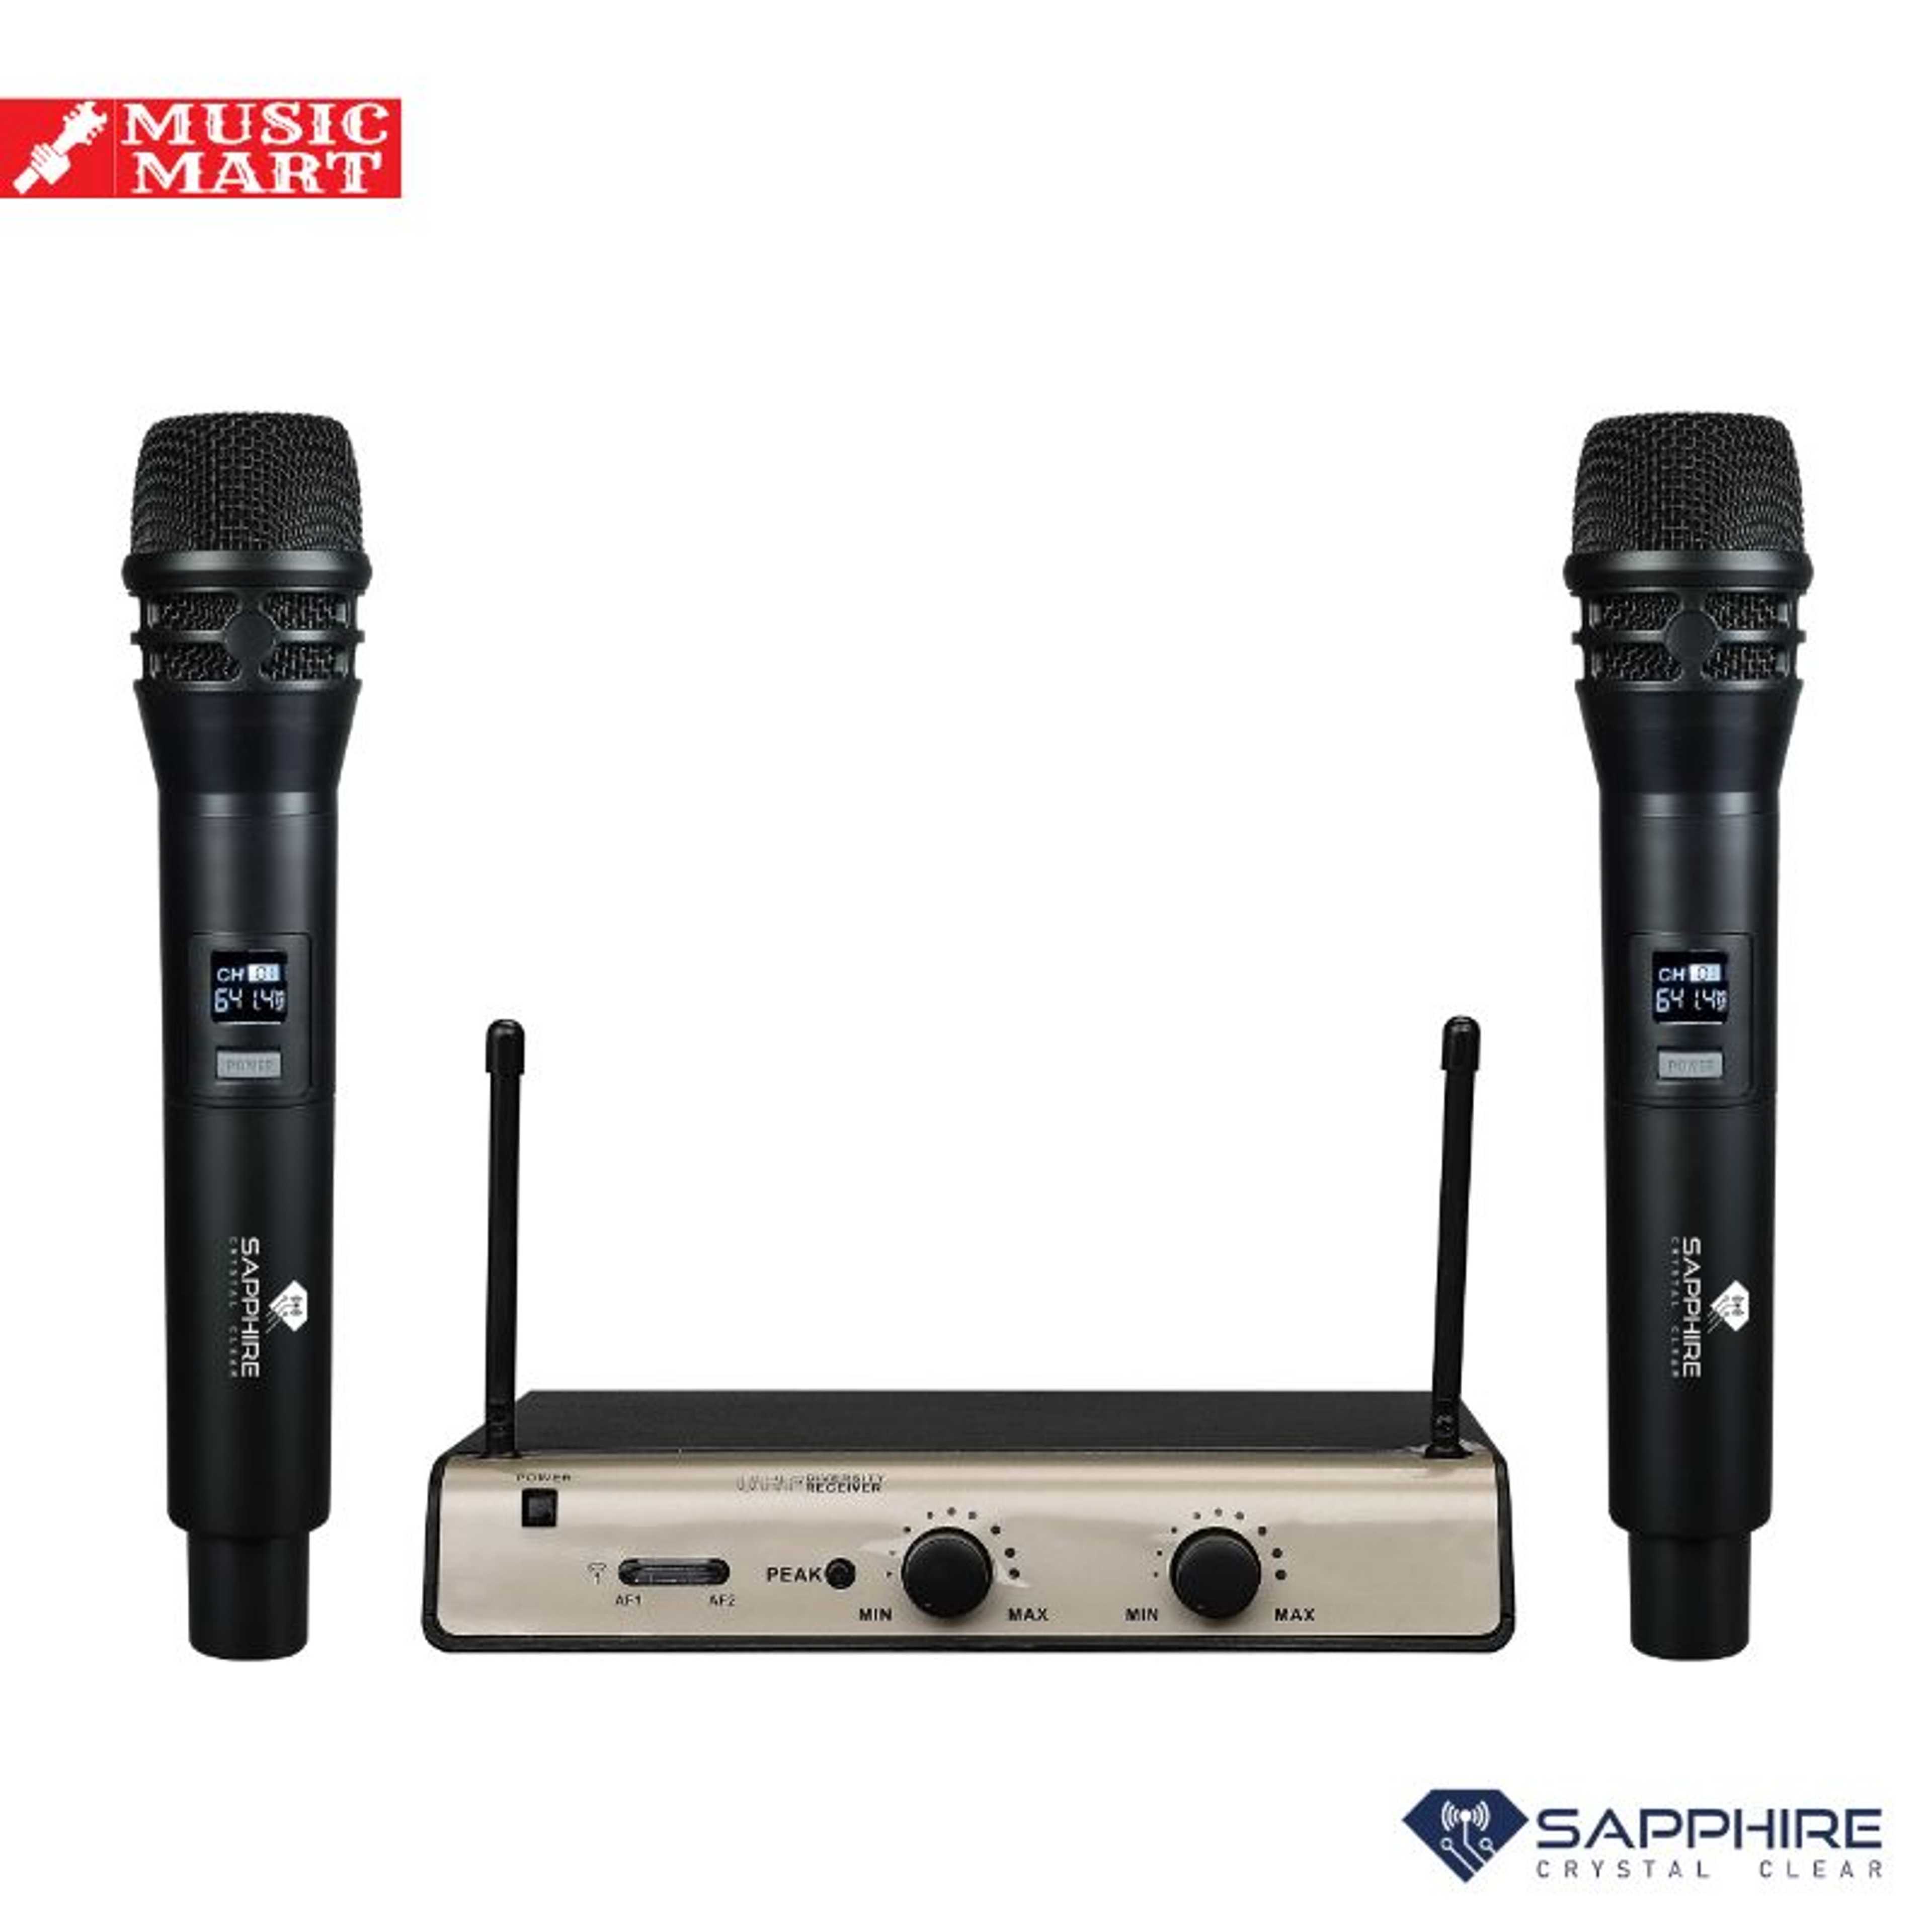 SP-SF937 Dual Handheld Wireless System - DUAL CHANNEL - STABLE SIGNAL & CLEAR SOUND - INDEPENDENT MIC VOLUME CONTROL - CONVENIENT POWER SWITCH - Wireless transmission effective range 65ft